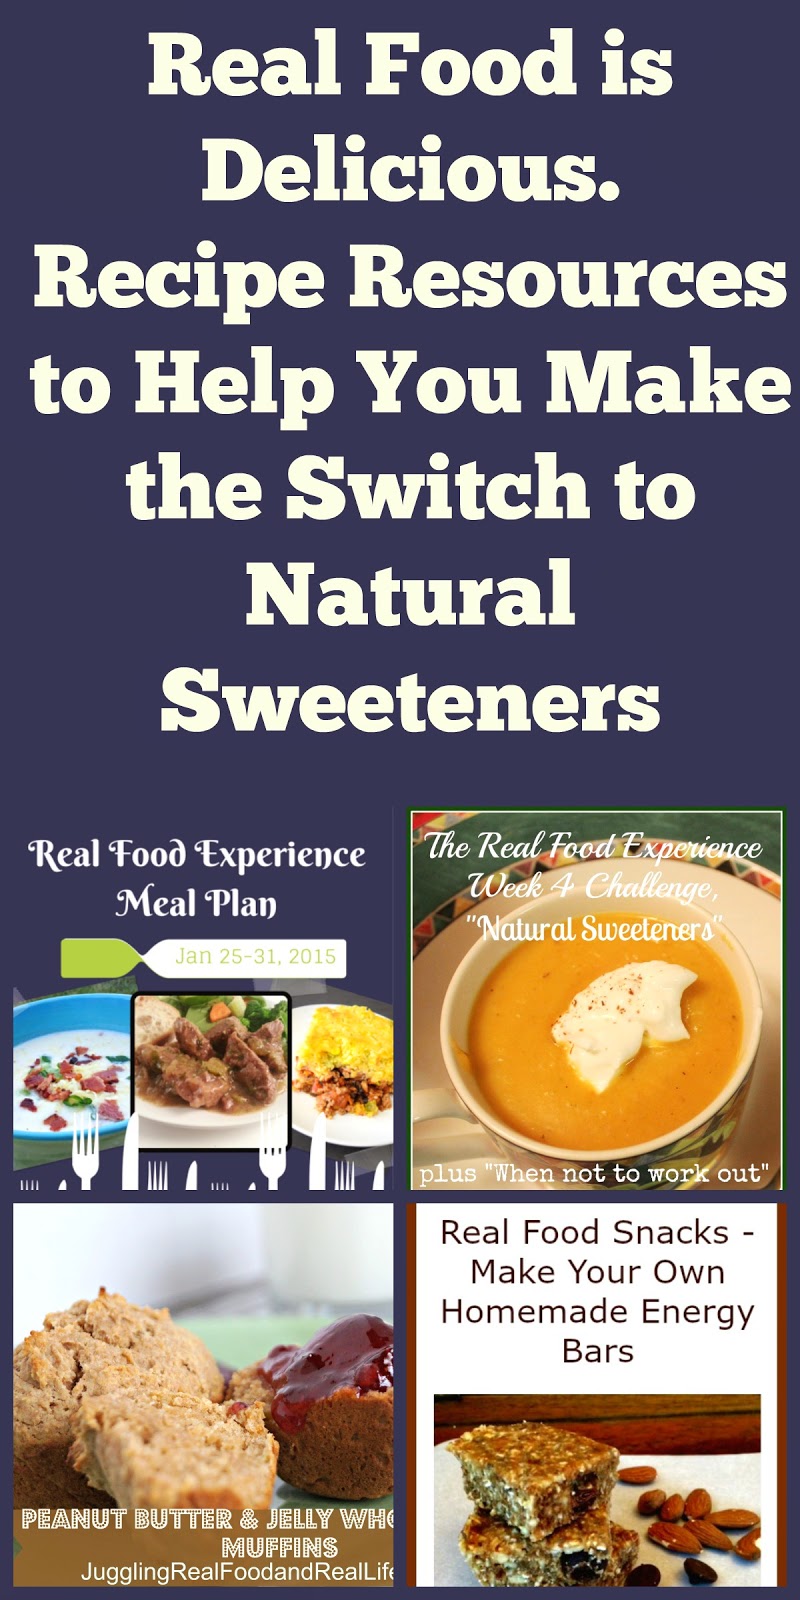 Real Food is Delicious: Recipe Resources to Help You Make the Switch to Natural Sweeteners